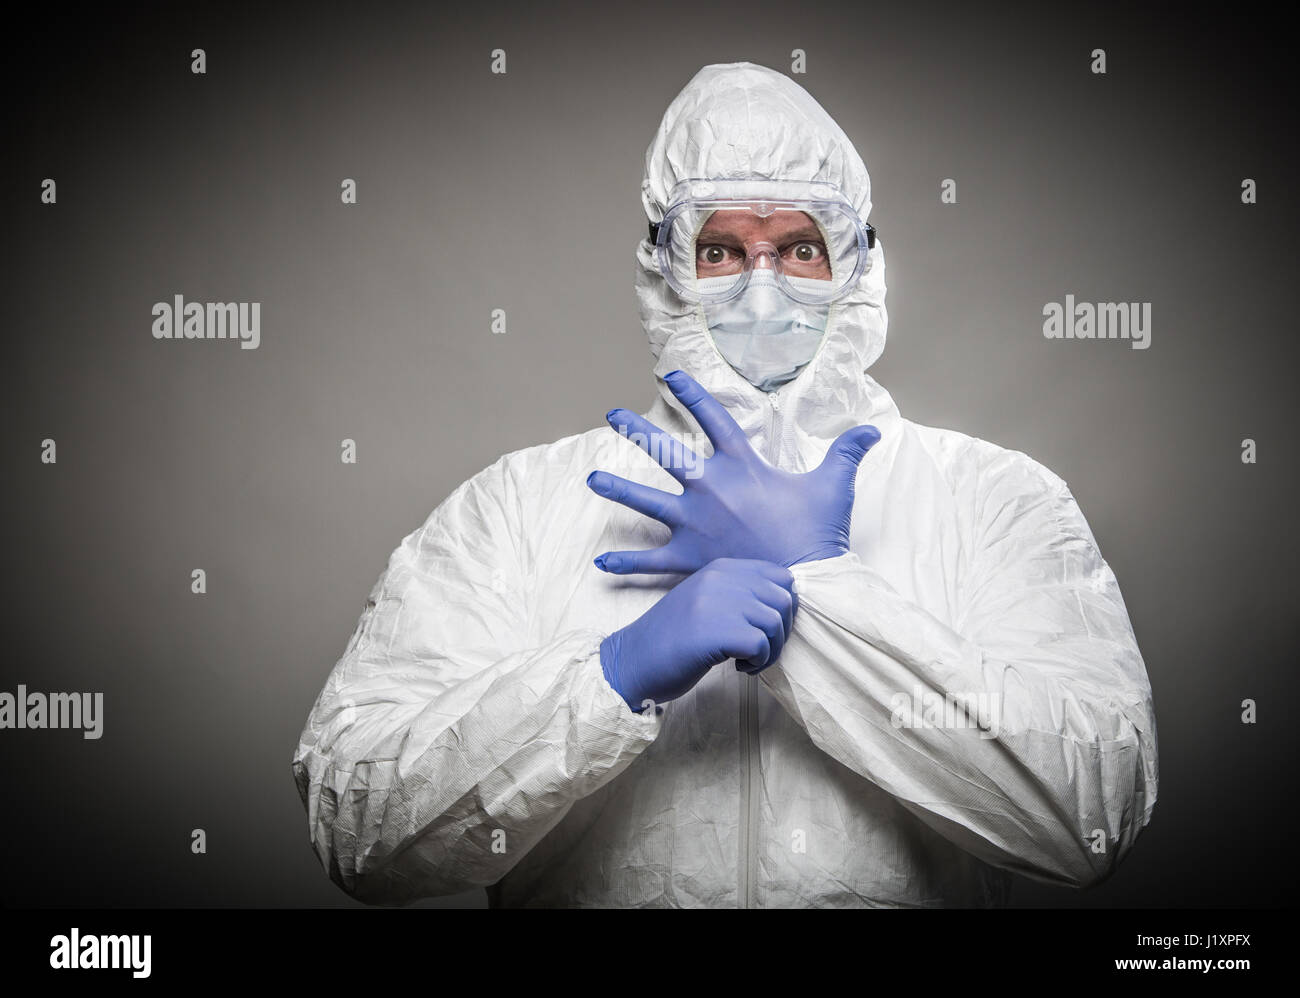 Man With Intense Expression Wearing HAZMAT Protective Clothing Against ...